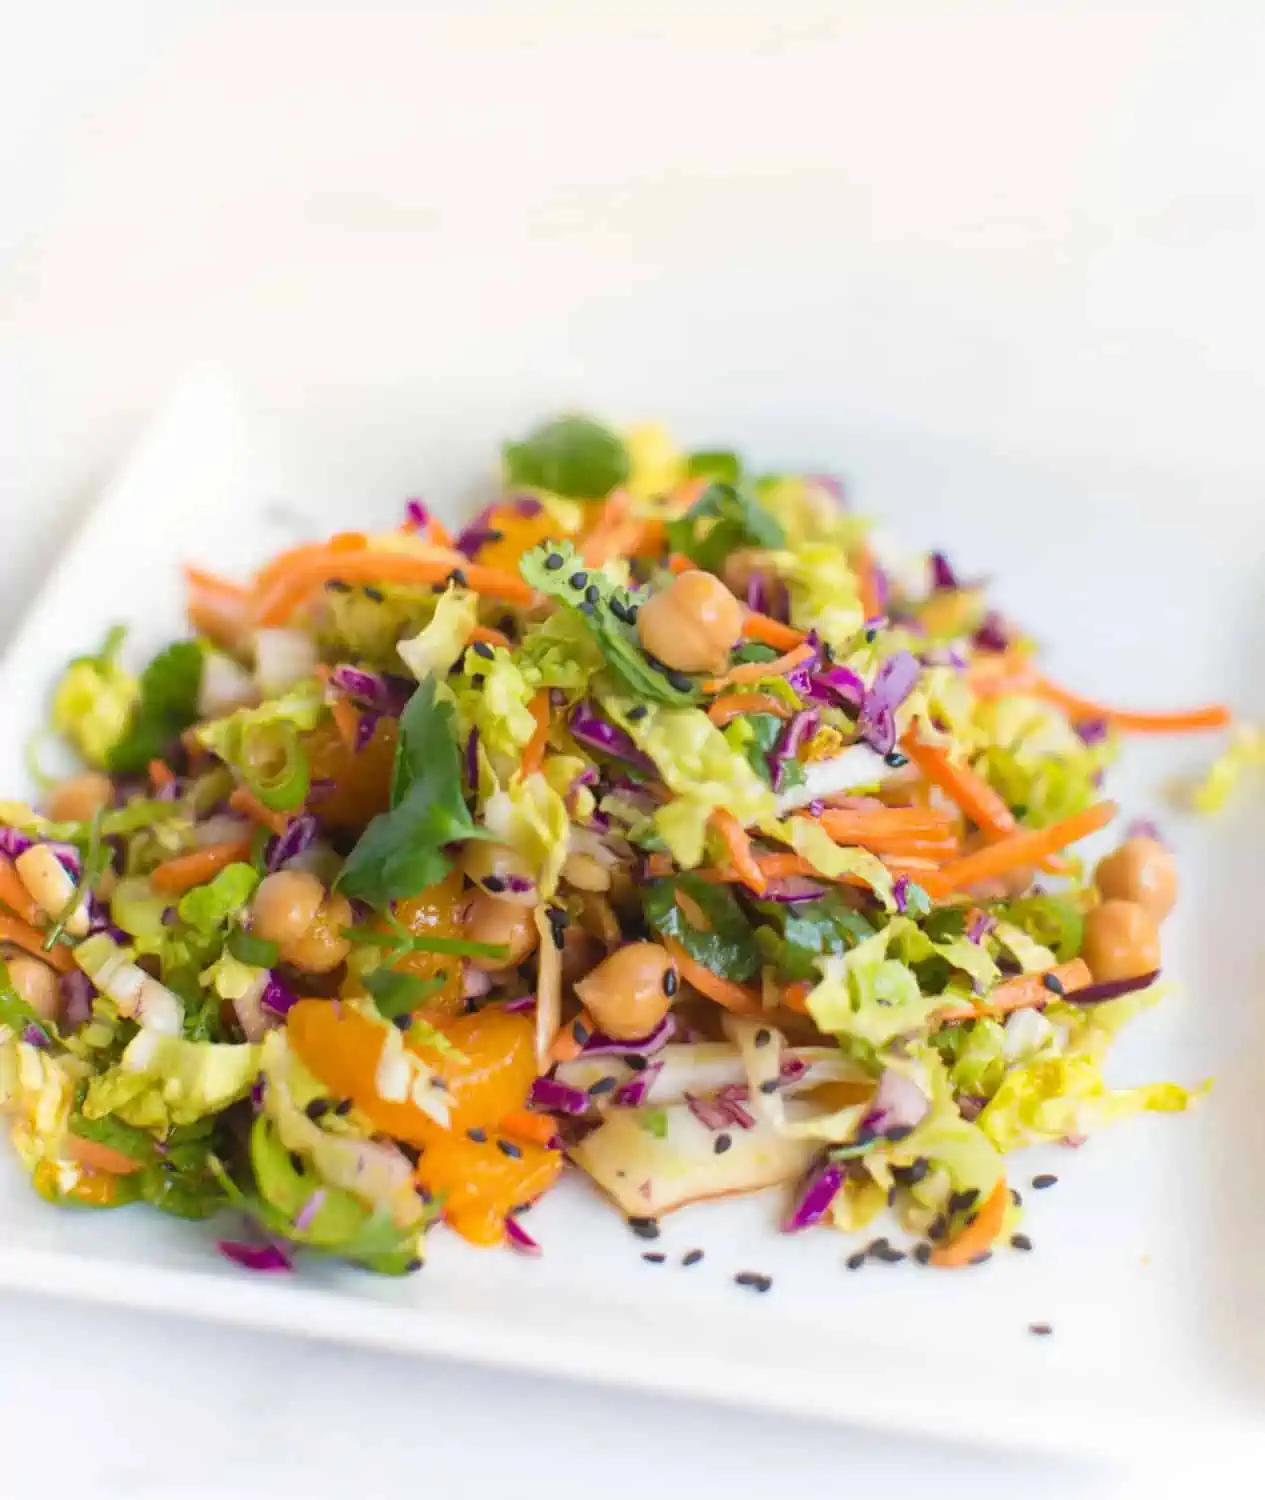 Gluten-free vegan side dish with cabbage, chickpeas, almonds, mandarin oranges, and more.